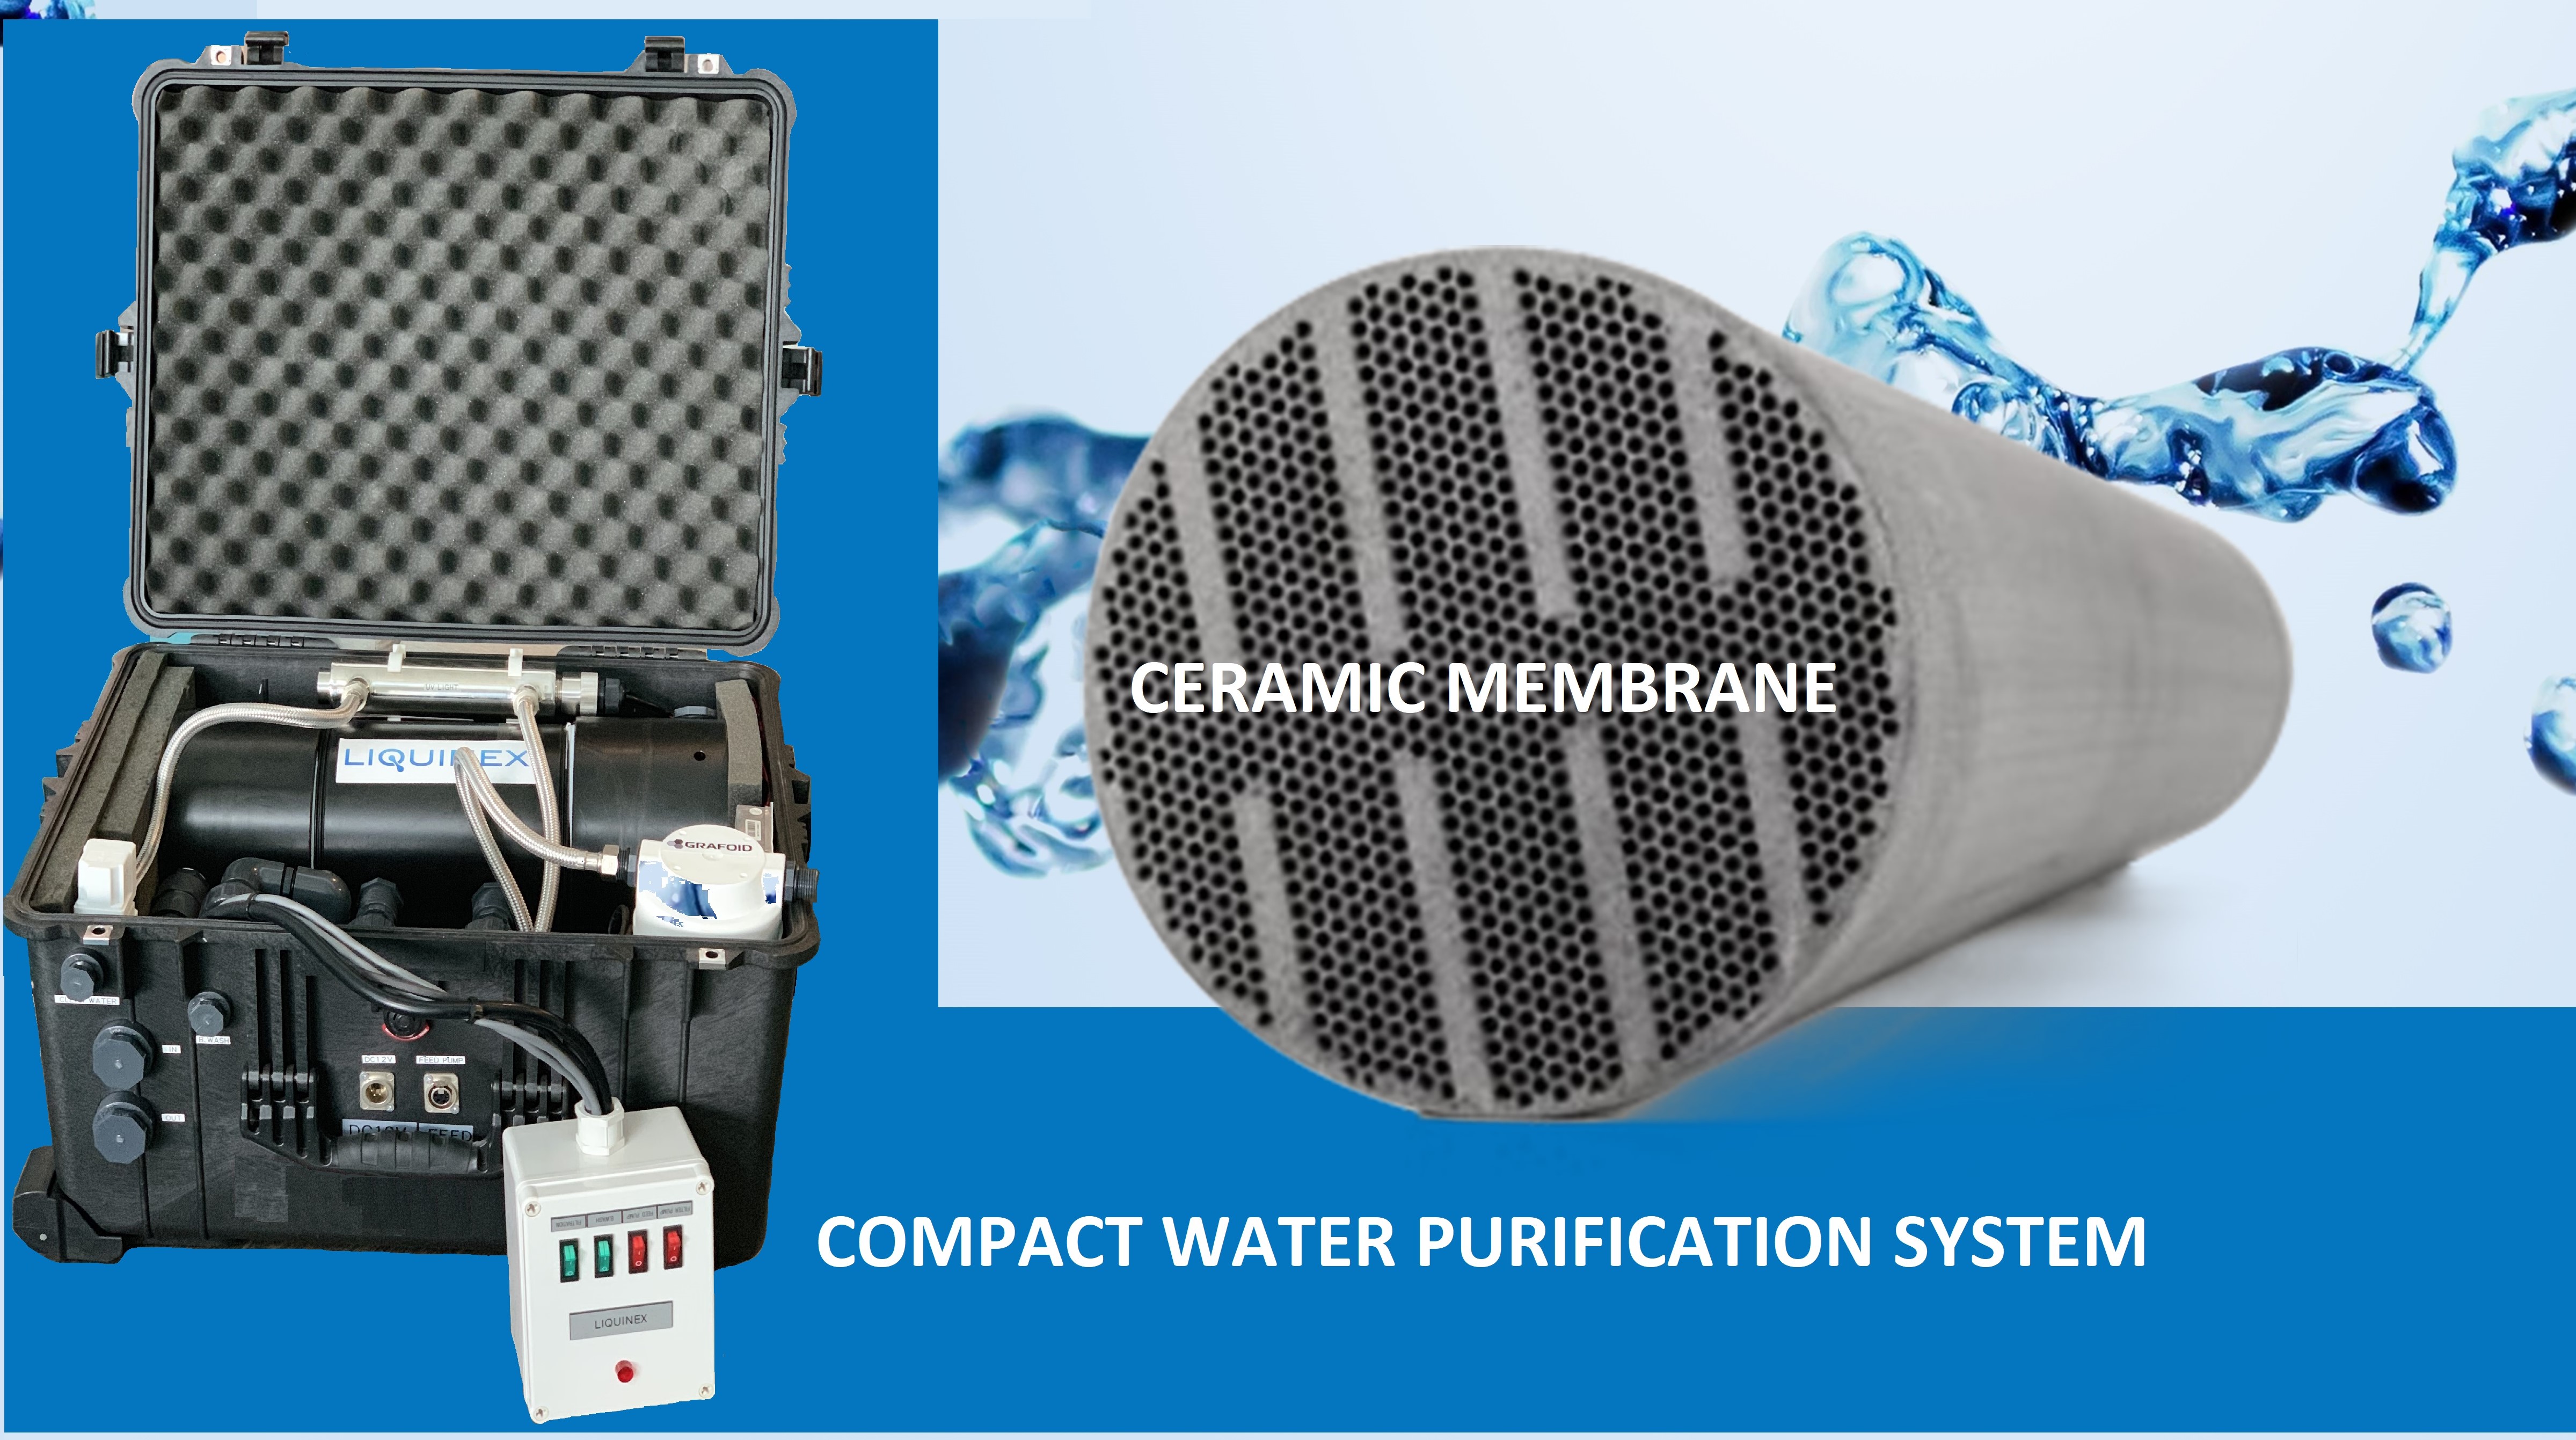 The compact water purification system weighs under 30 kg, so is easily transported and able to access remote areas.